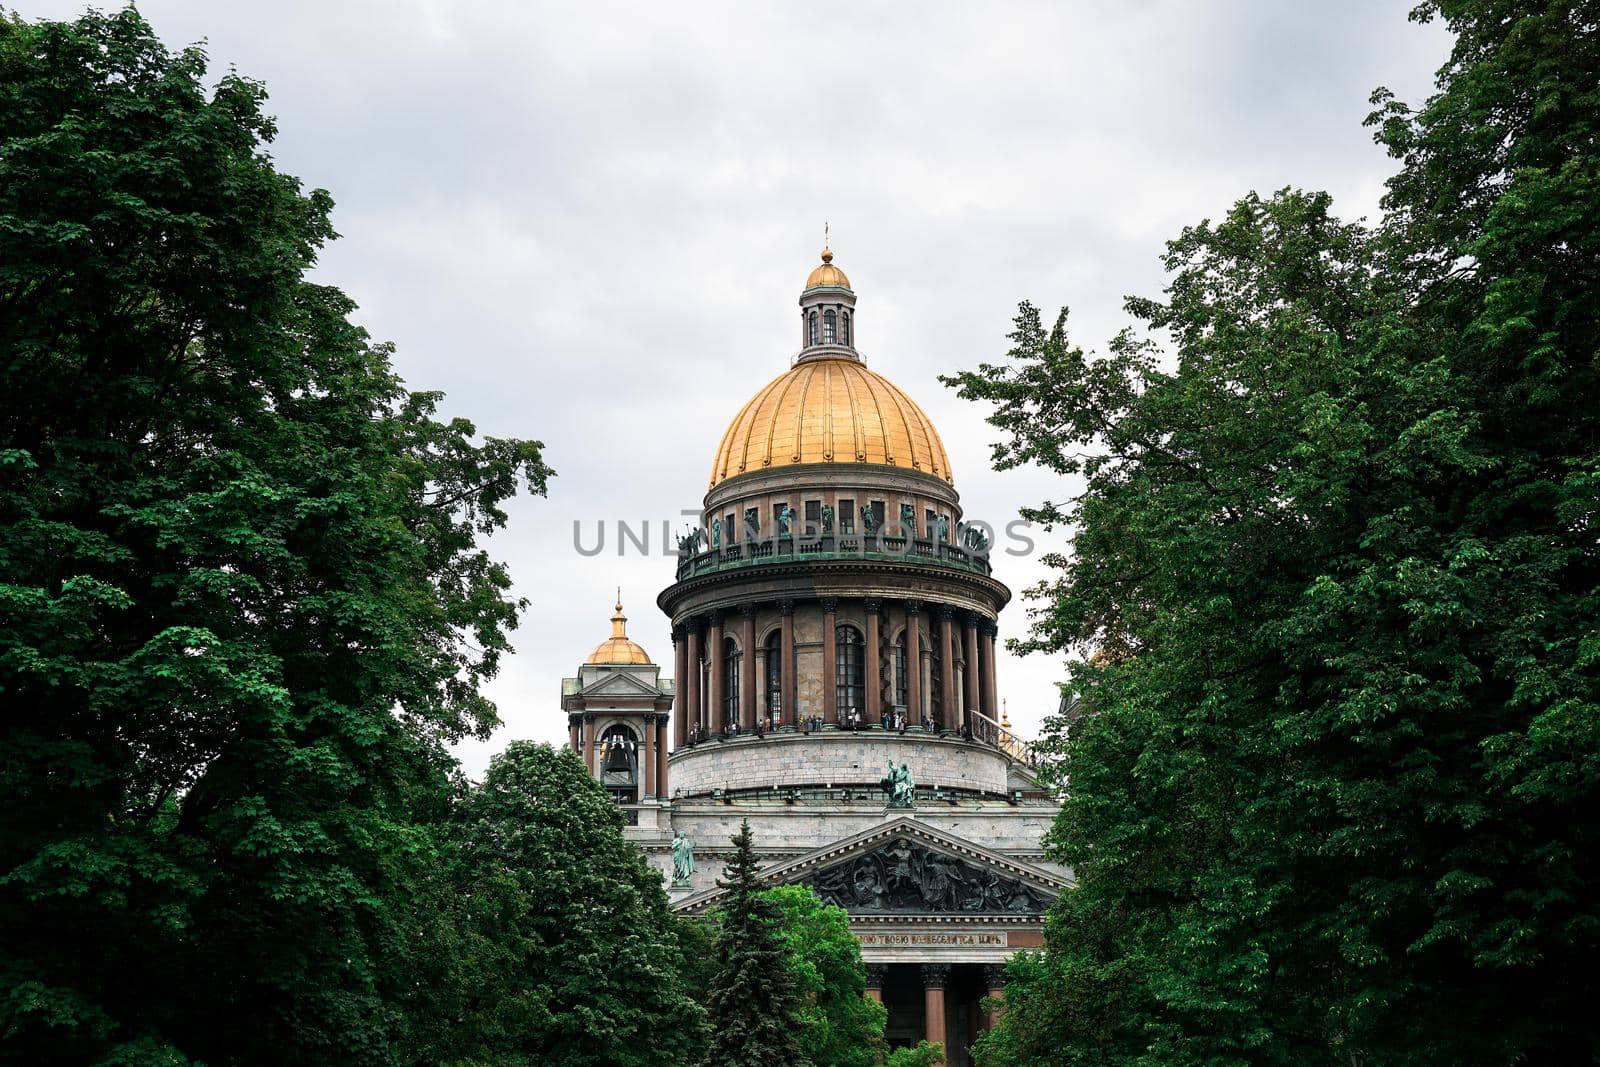 Saint Isaac cathedral in St Petersburg, Russia. The dome of the cathedral is visible through the green crown of trees